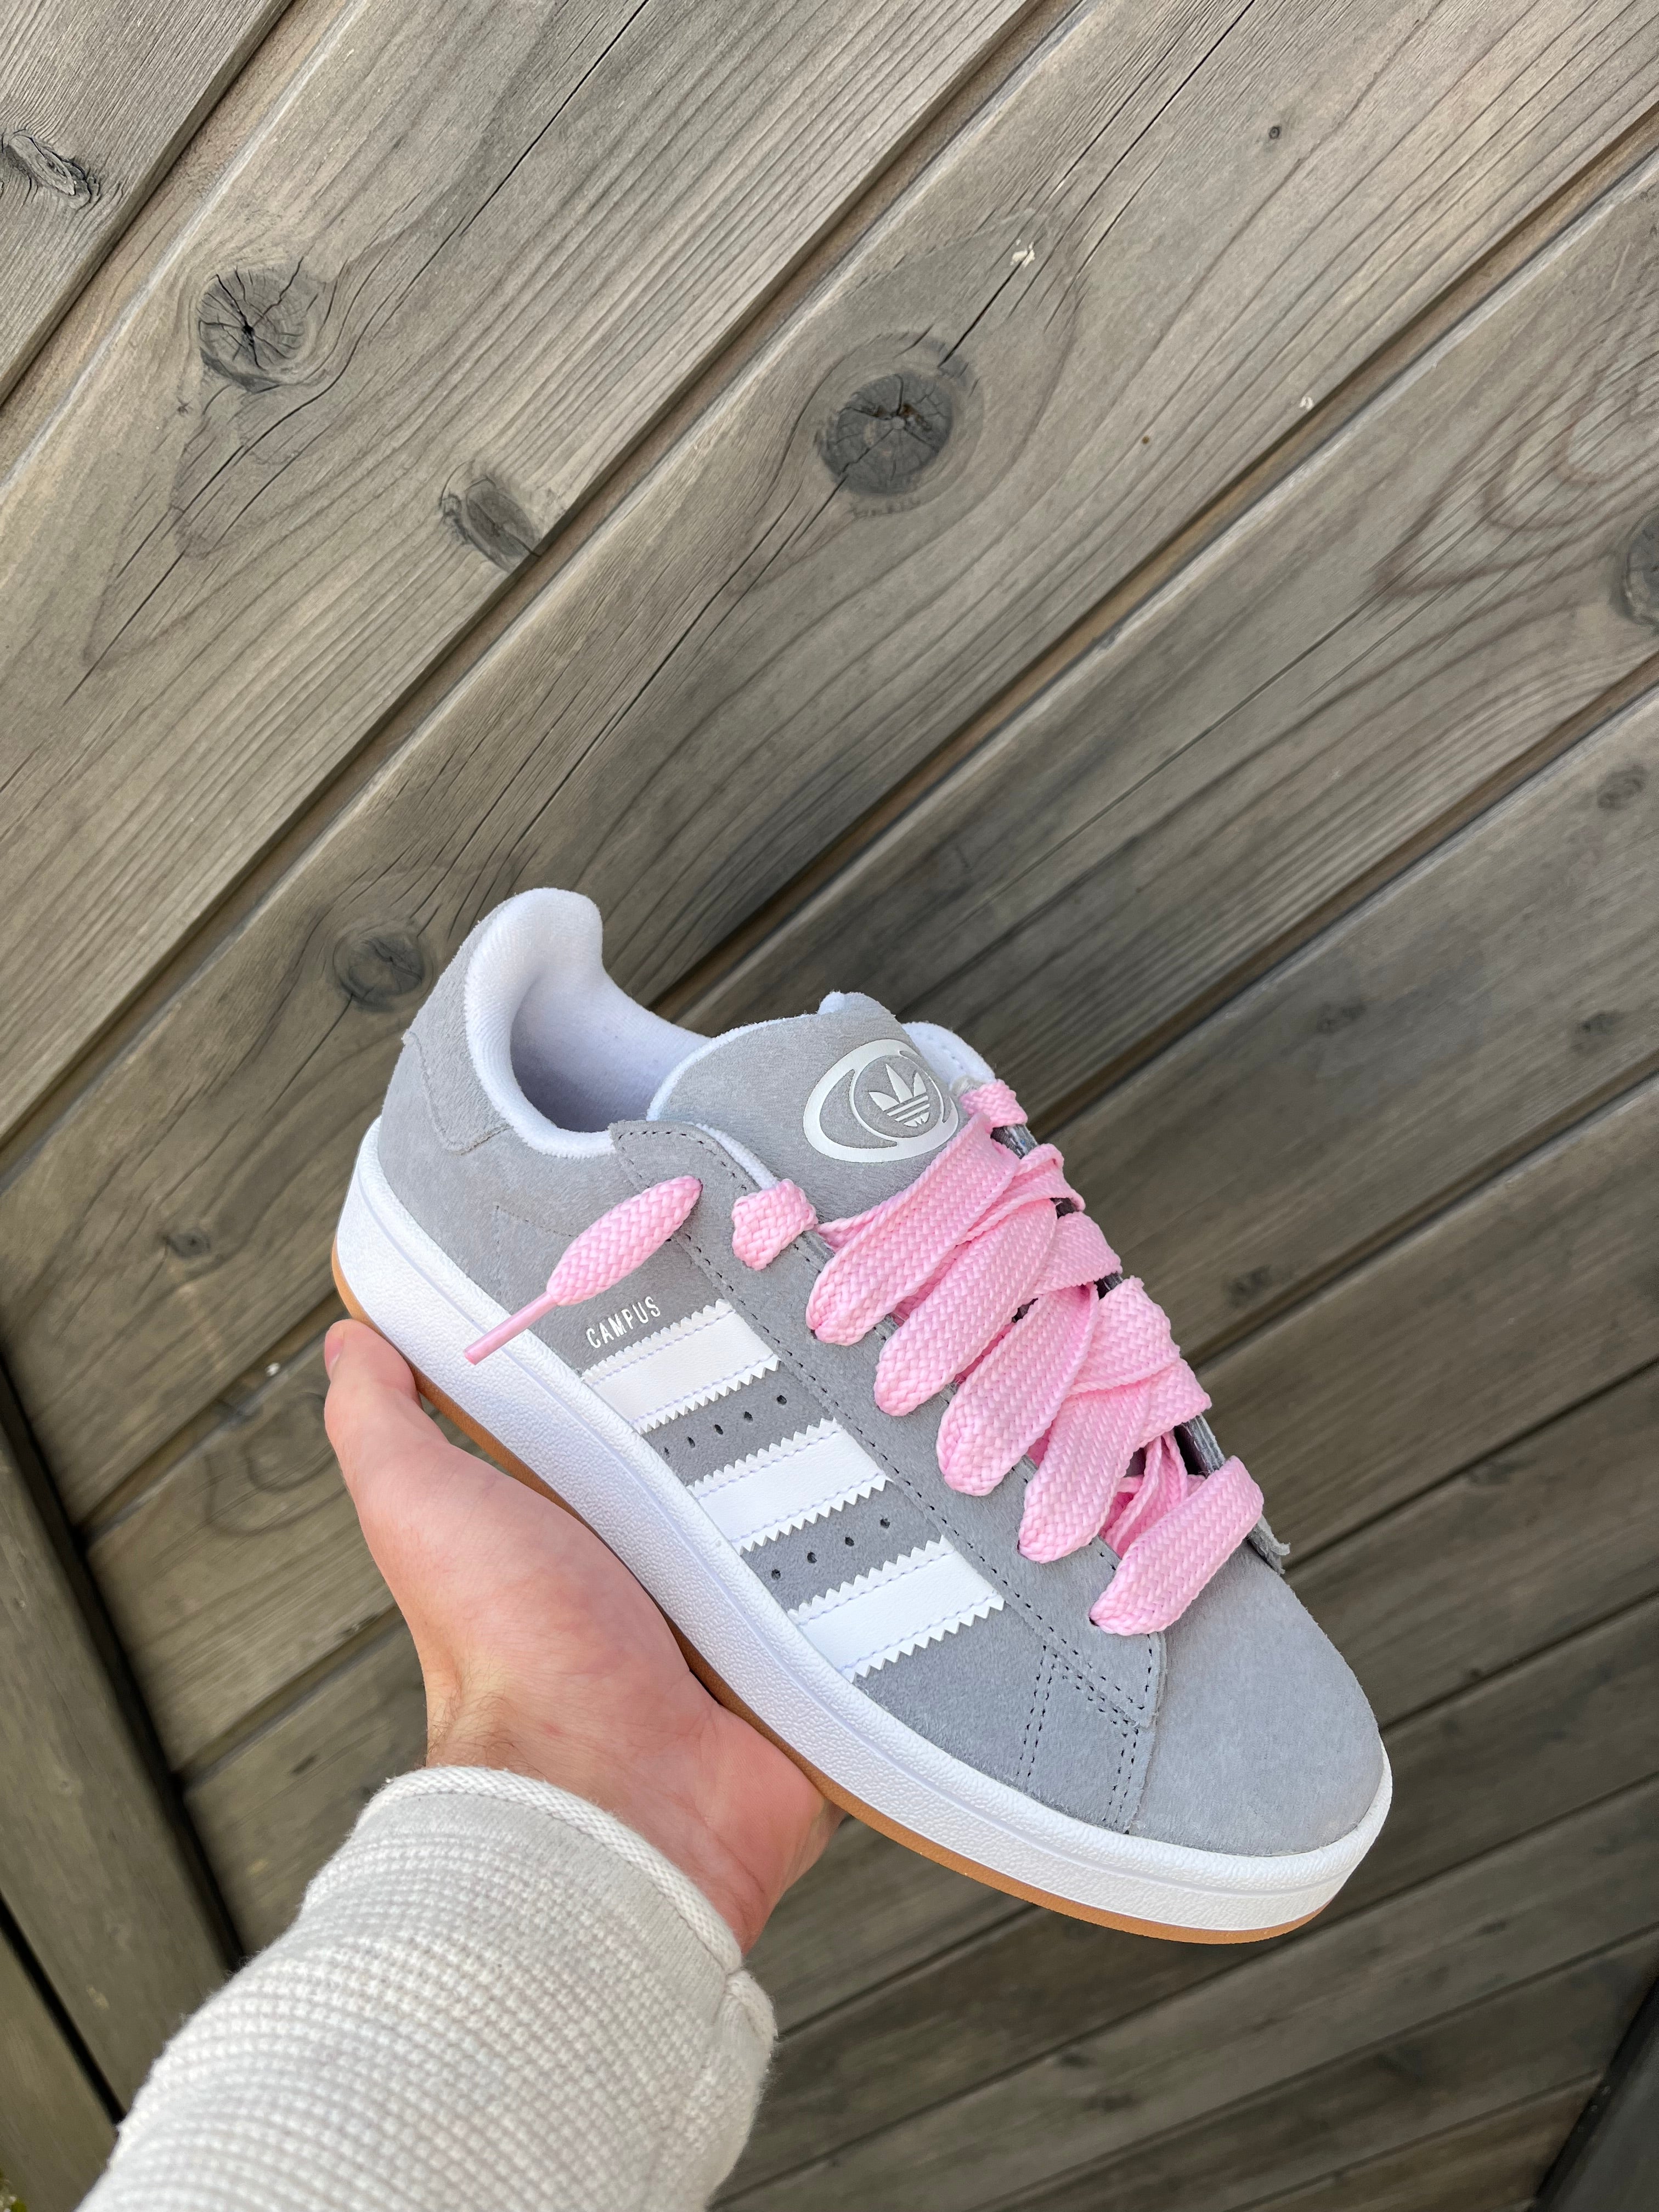 Adidas Campus laces pink - Extra wide laces pink